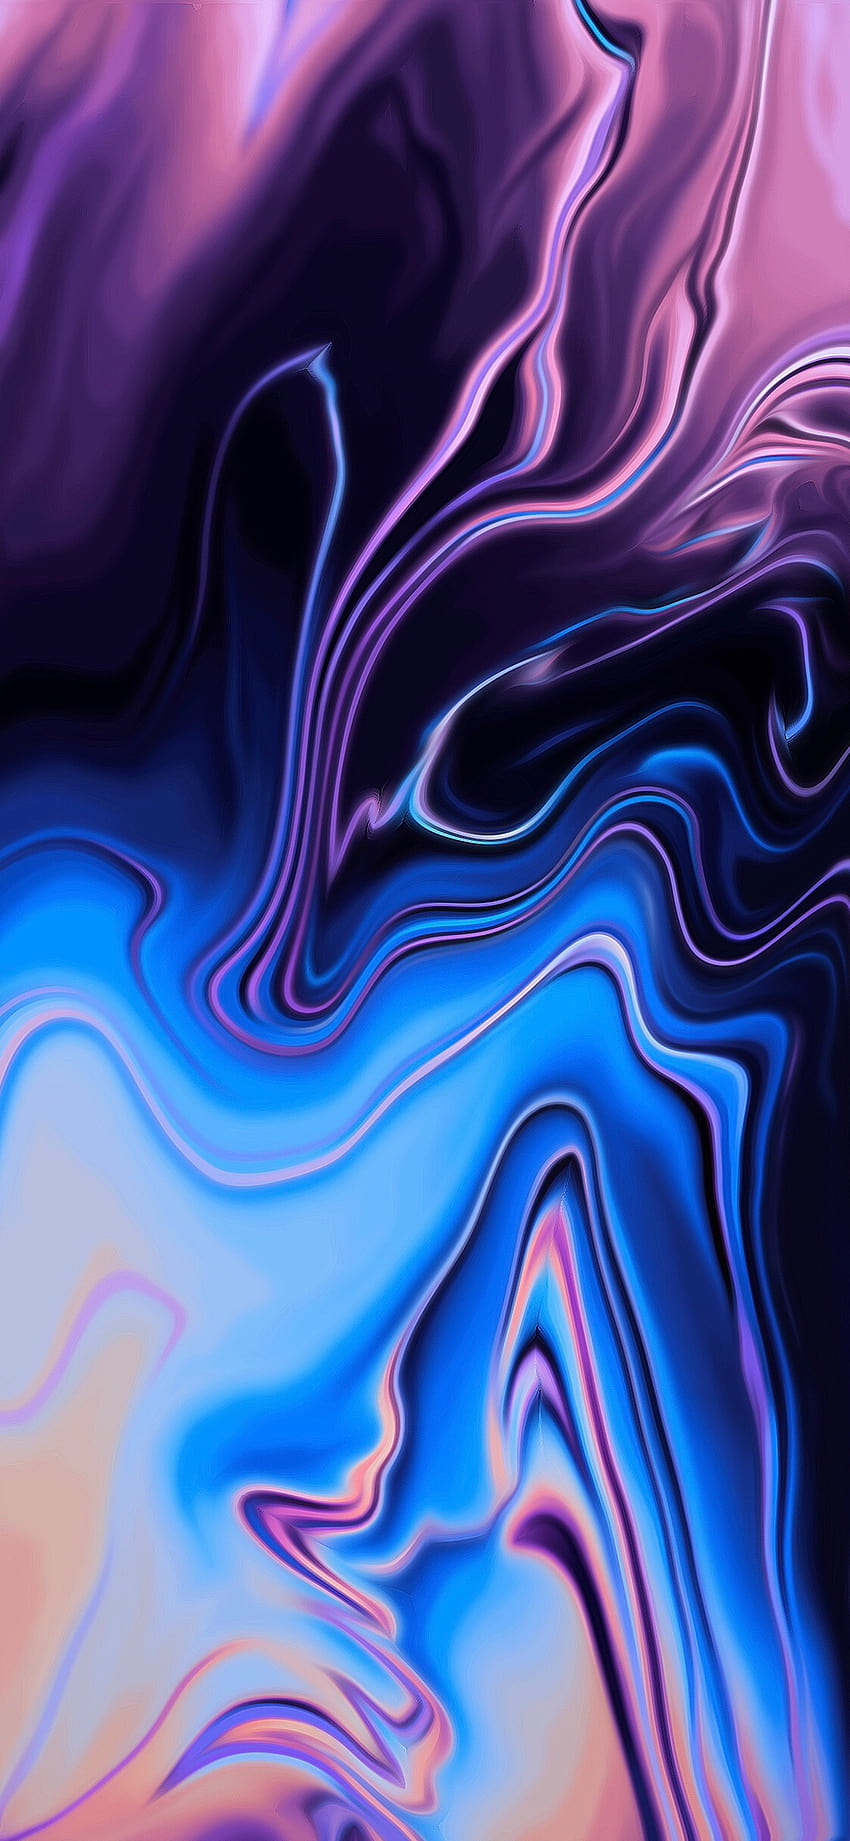 Oil Slick posted by Ethan Anderson, hydro dip HD phone wallpaper